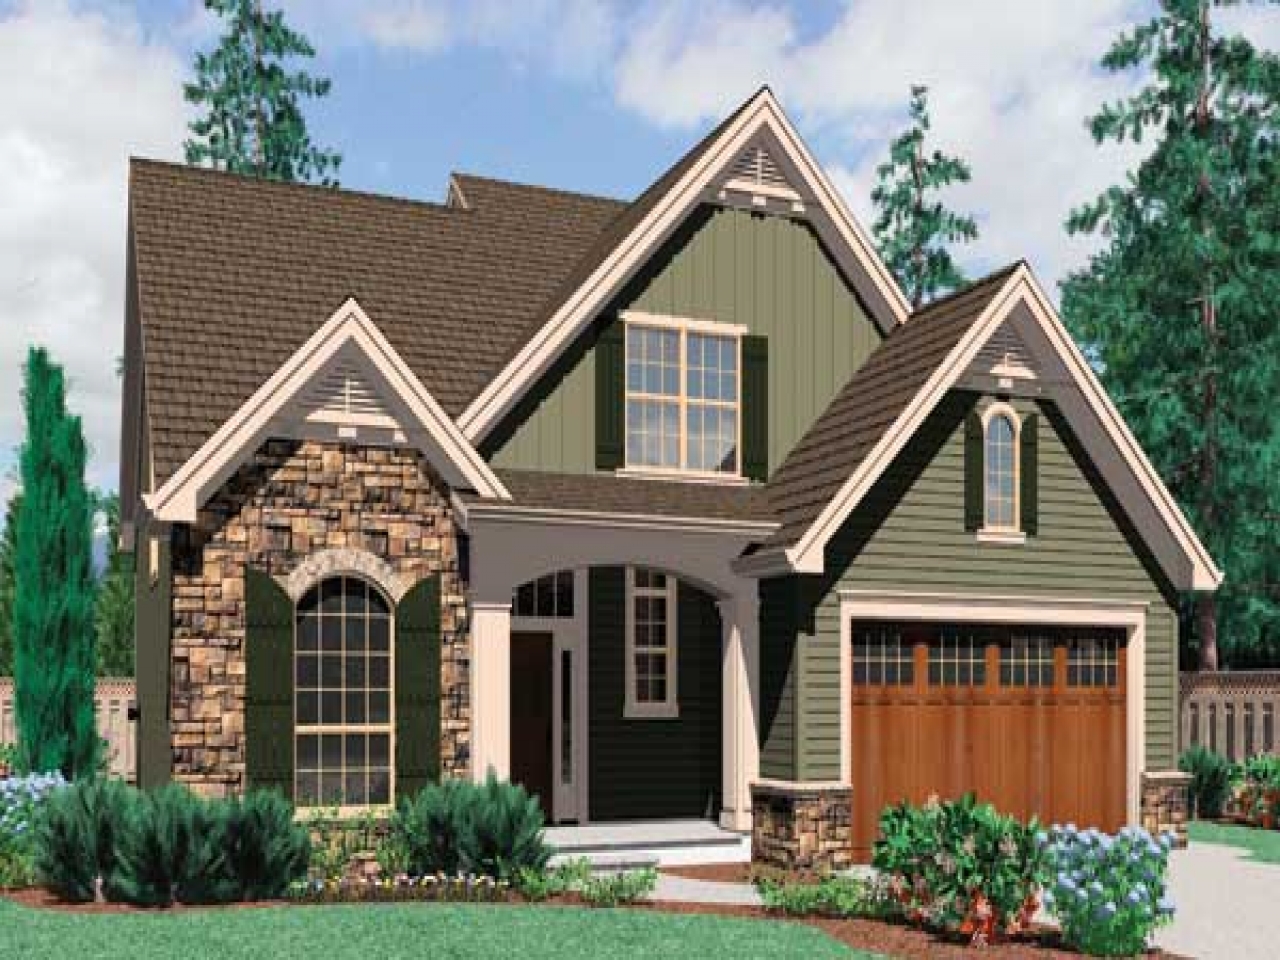 Small 2 Story Cottage Style House Plans HOUSE STYLE DESIGN Charm 2